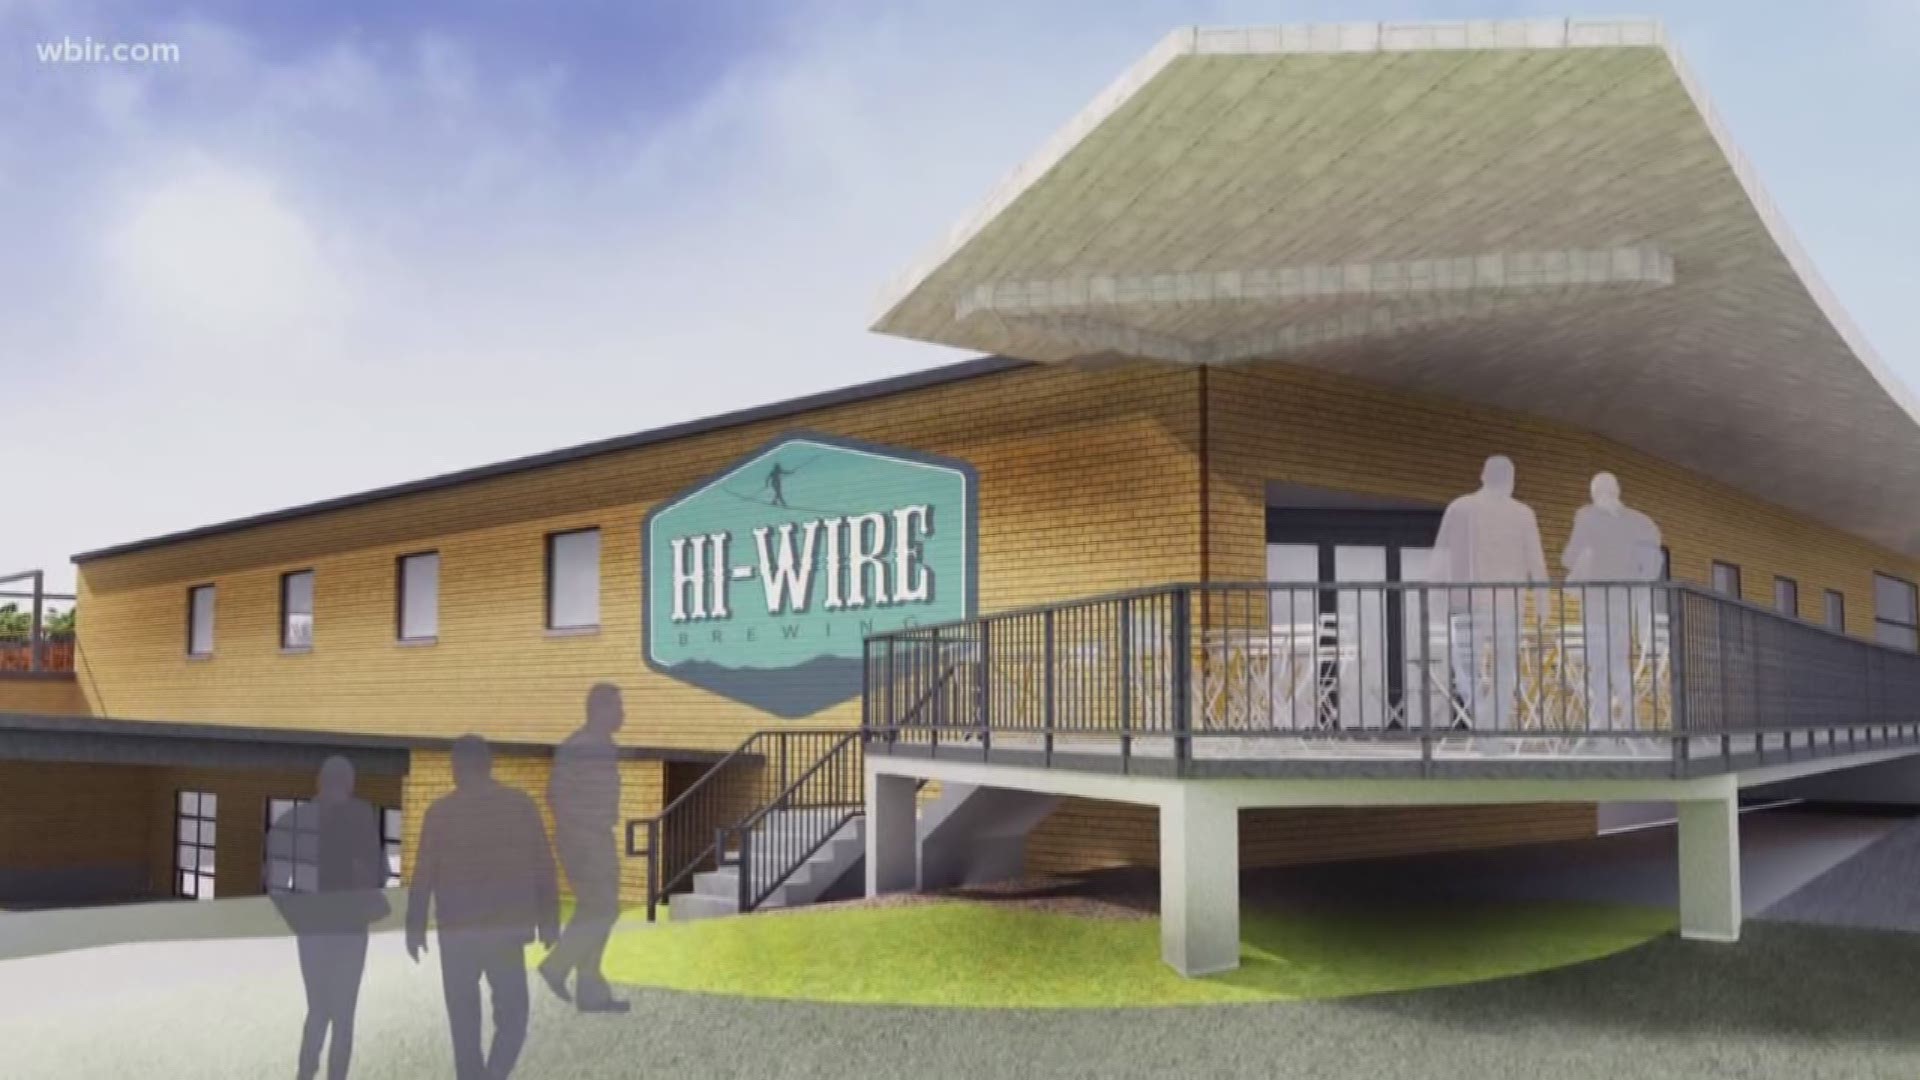 The brewery says the Sevier Ave. location will have 2 outdoor decks, including a rooftop with views of downtown.